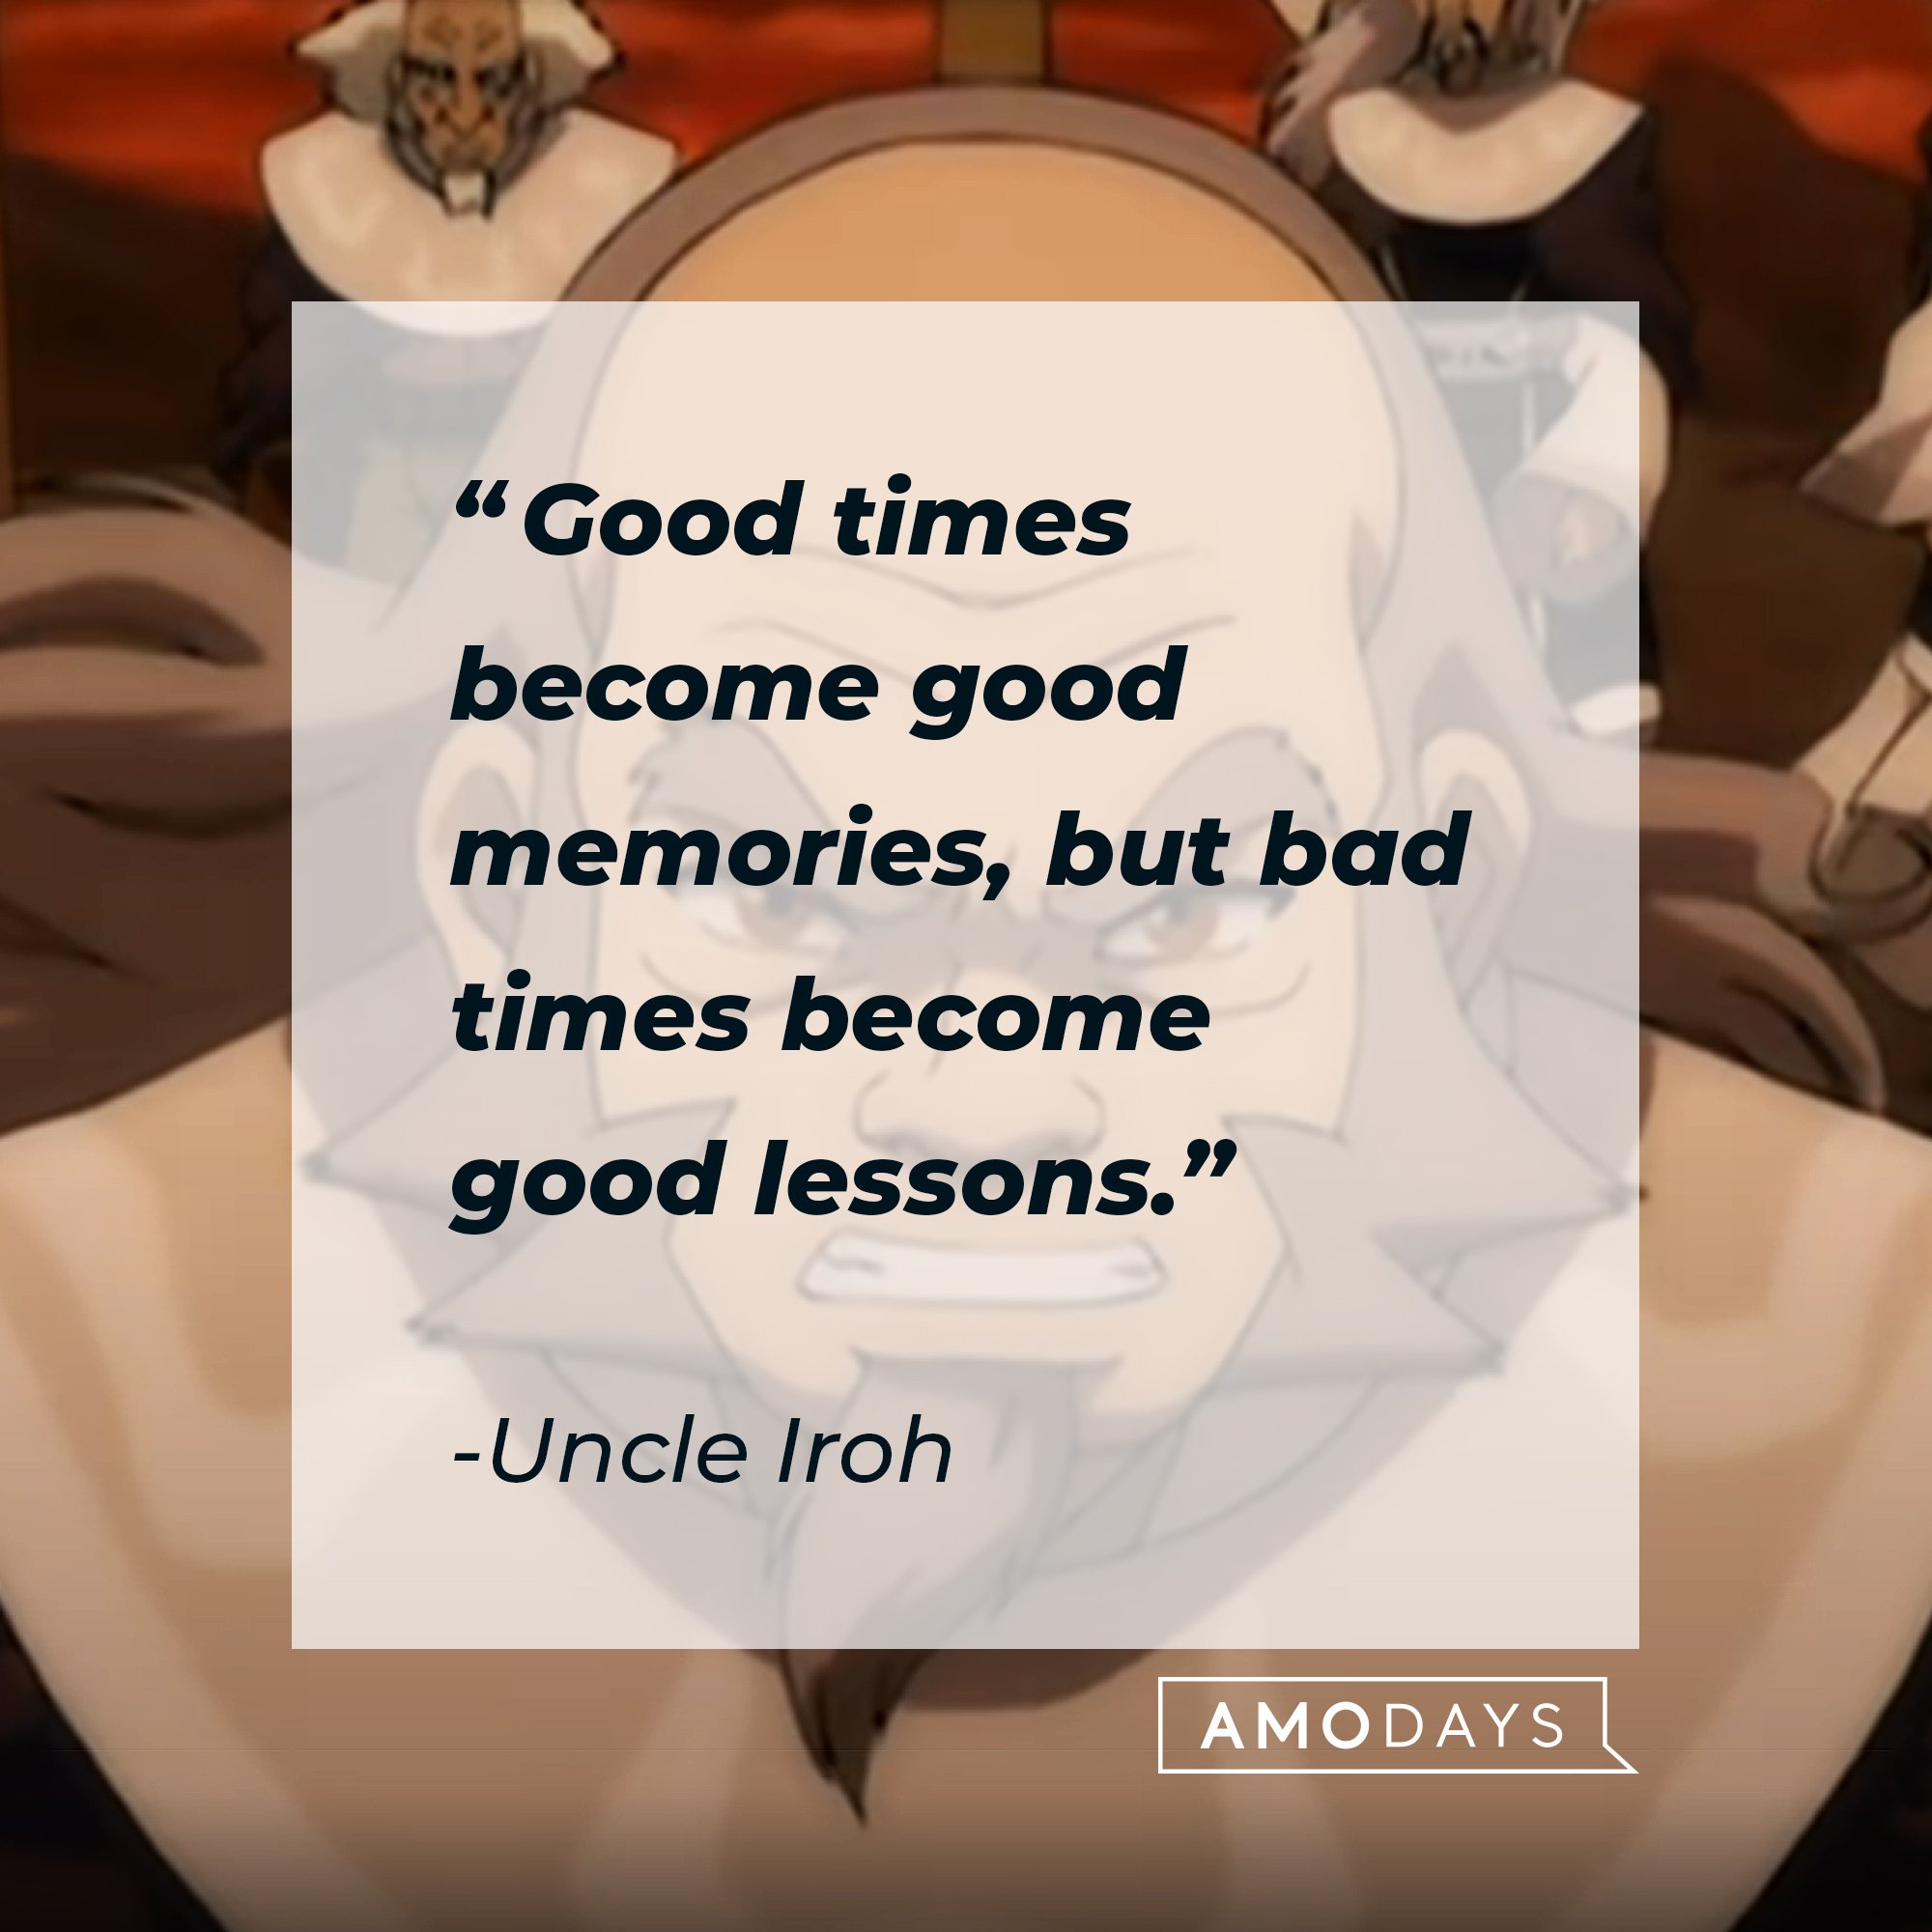 Uncle Iroh's quote: “Good times become good memories, but bad times become good lessons.” | Image: AmoDays